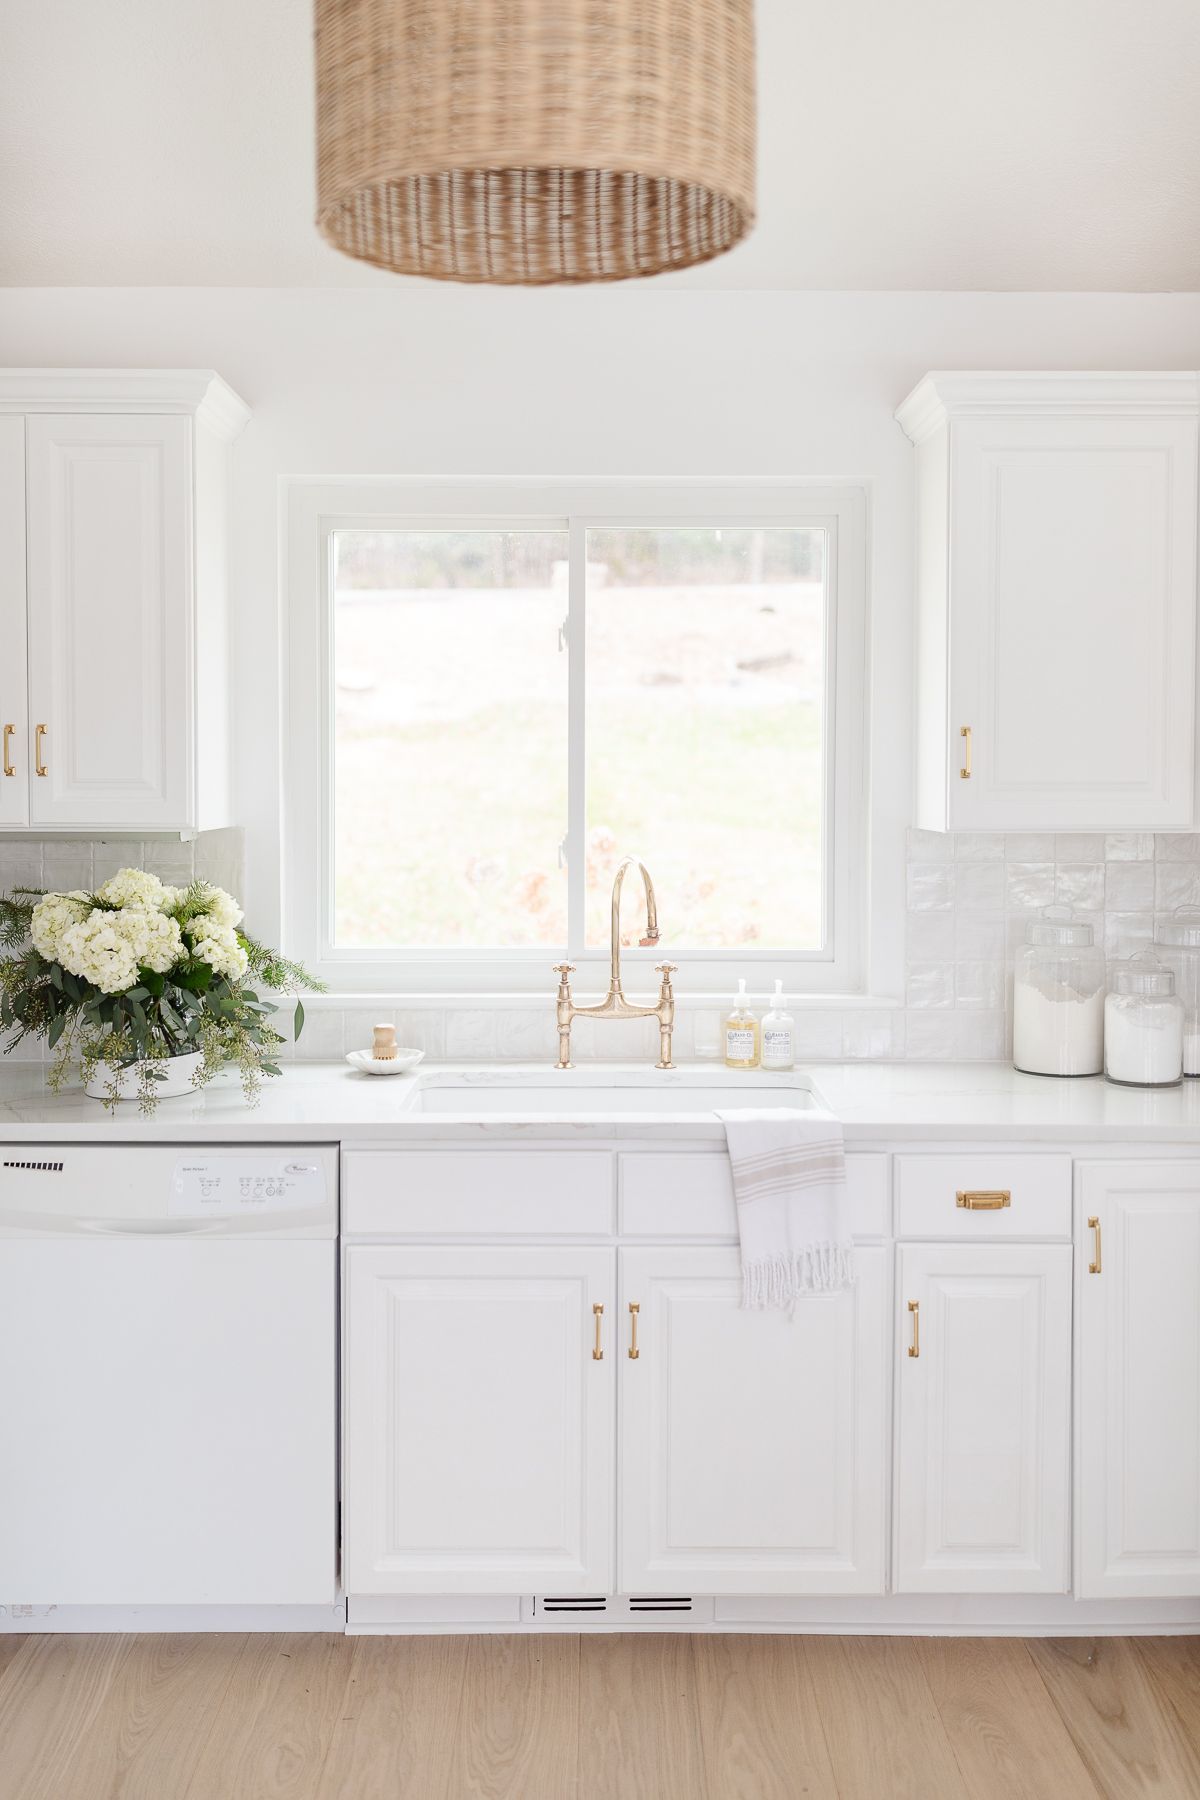 A white kitchen with a white tile backsplash and flowers by the sink